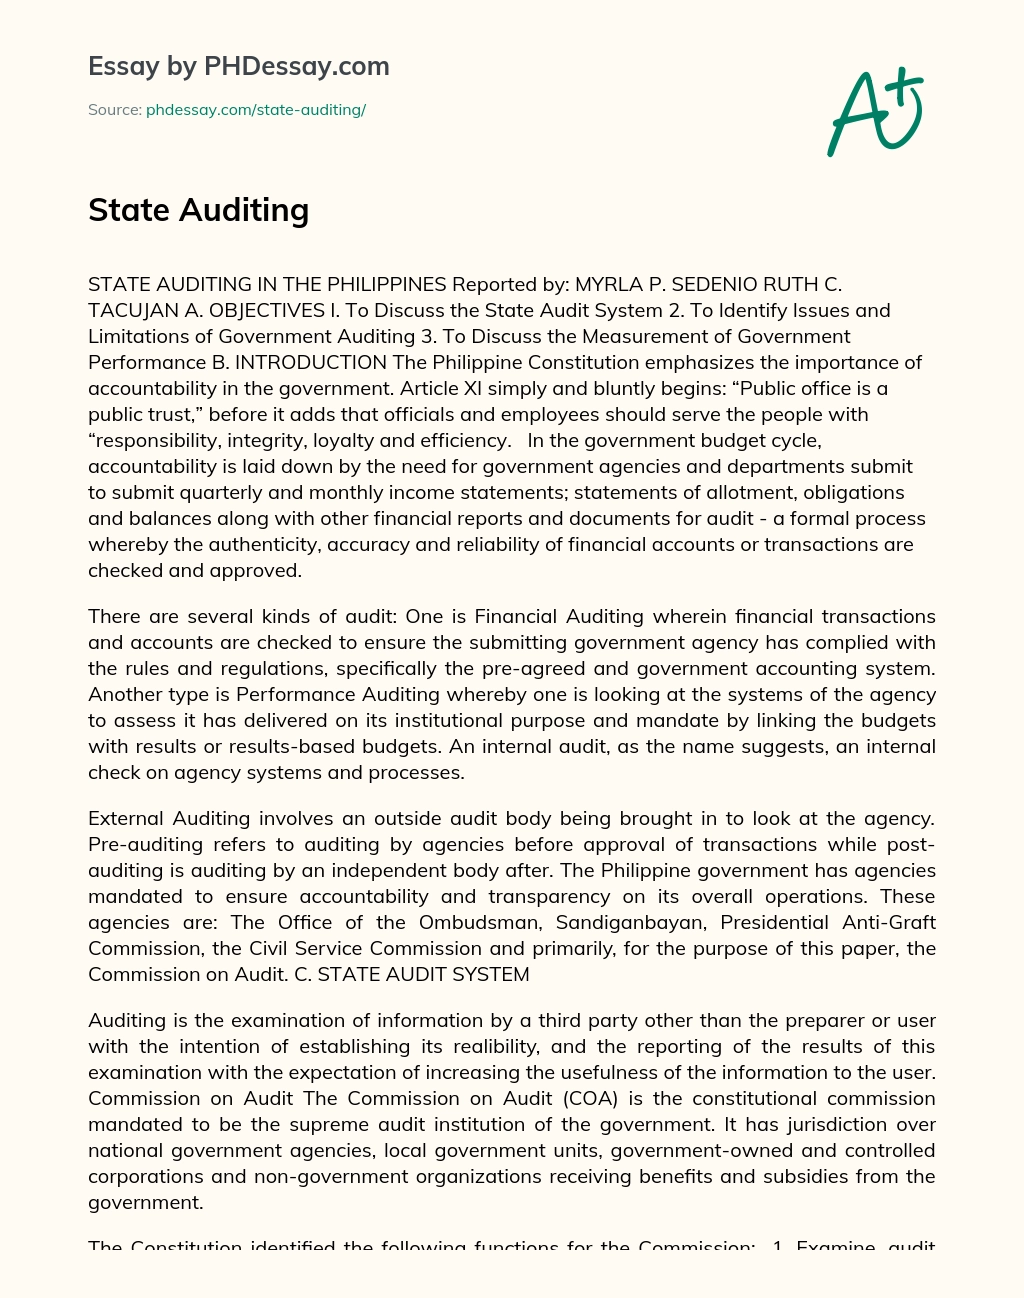 State Auditing essay